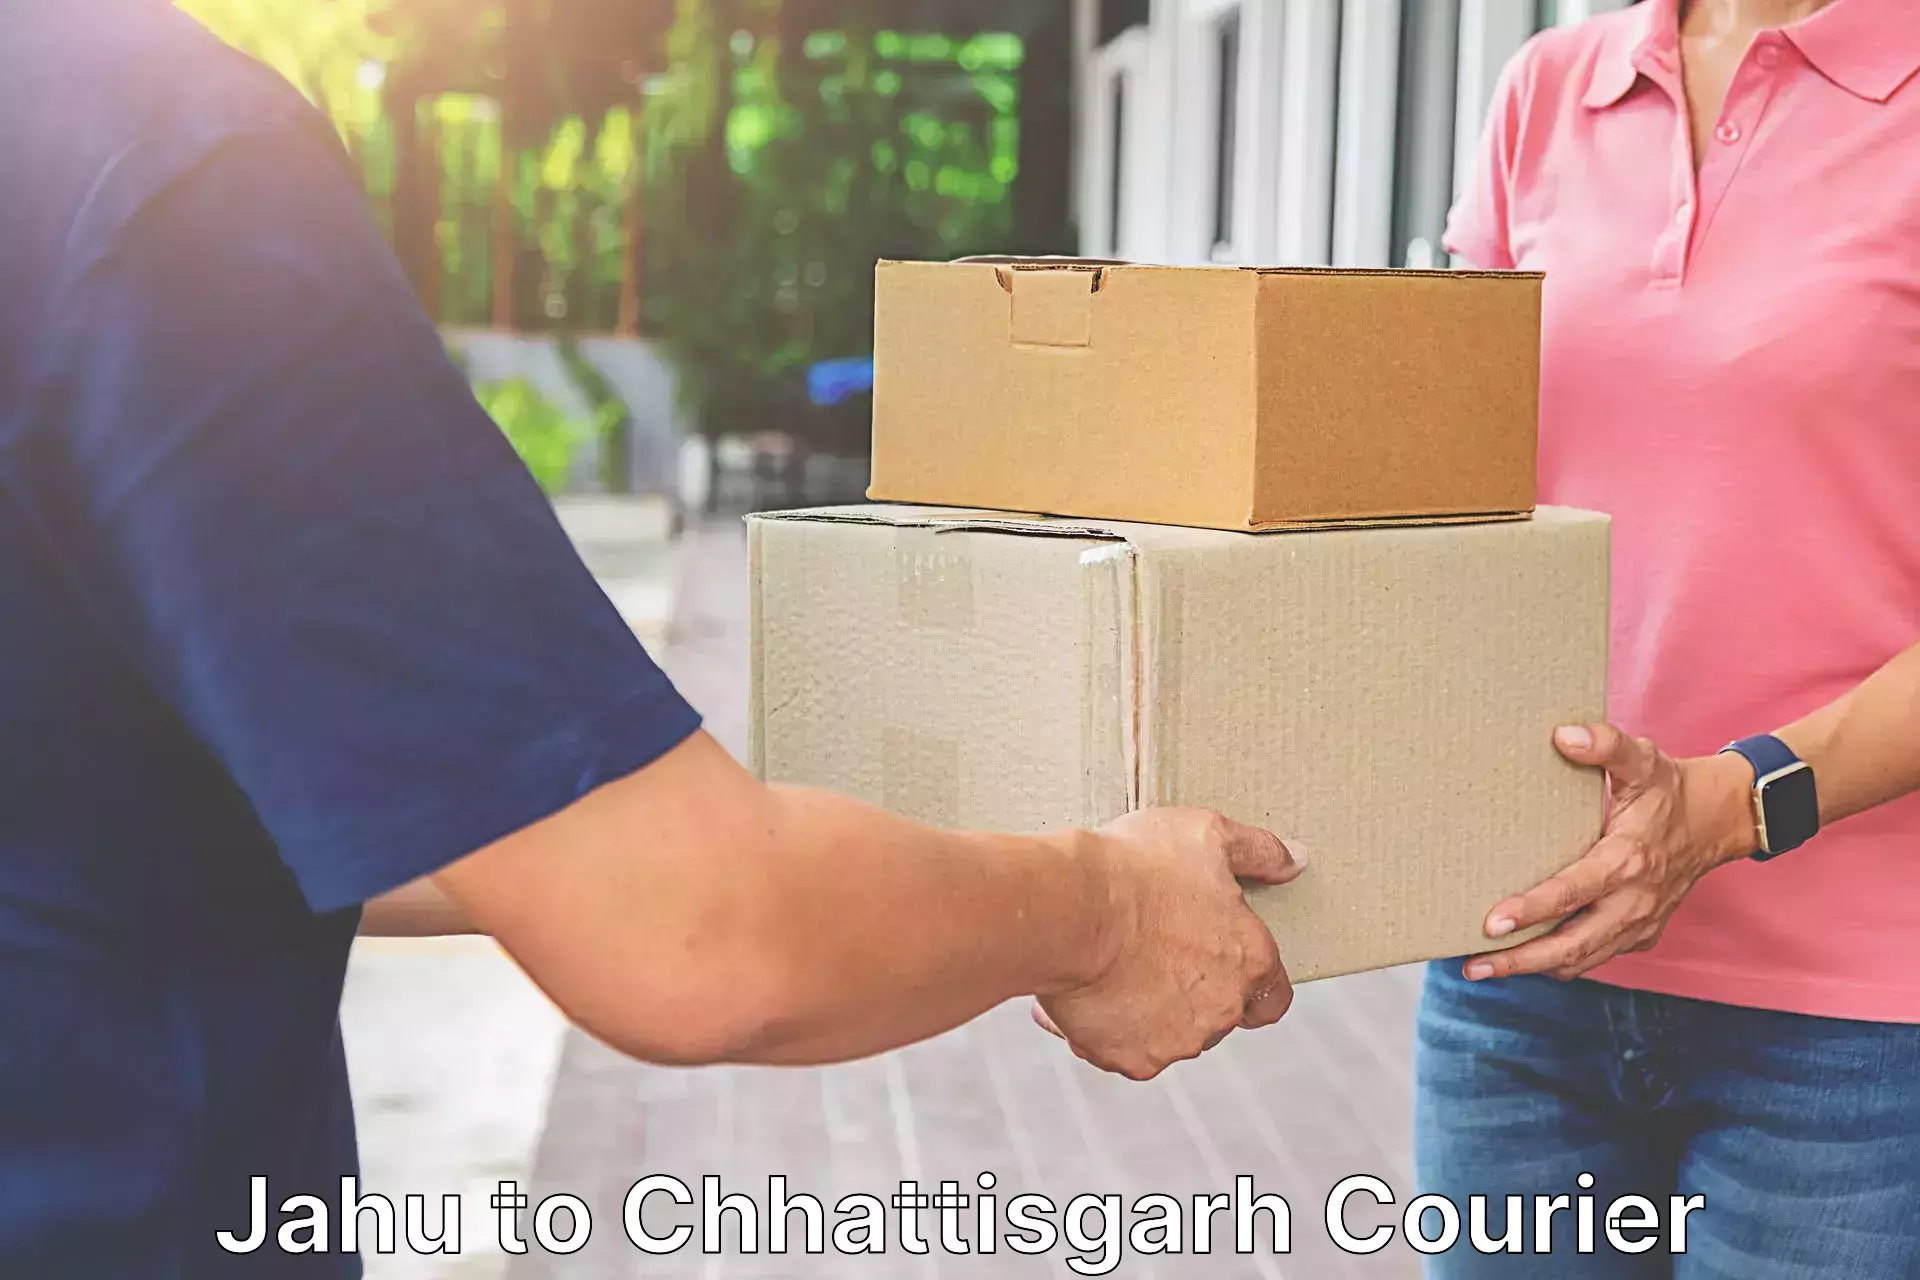 Affordable parcel service in Jahu to Patna Chhattisgarh